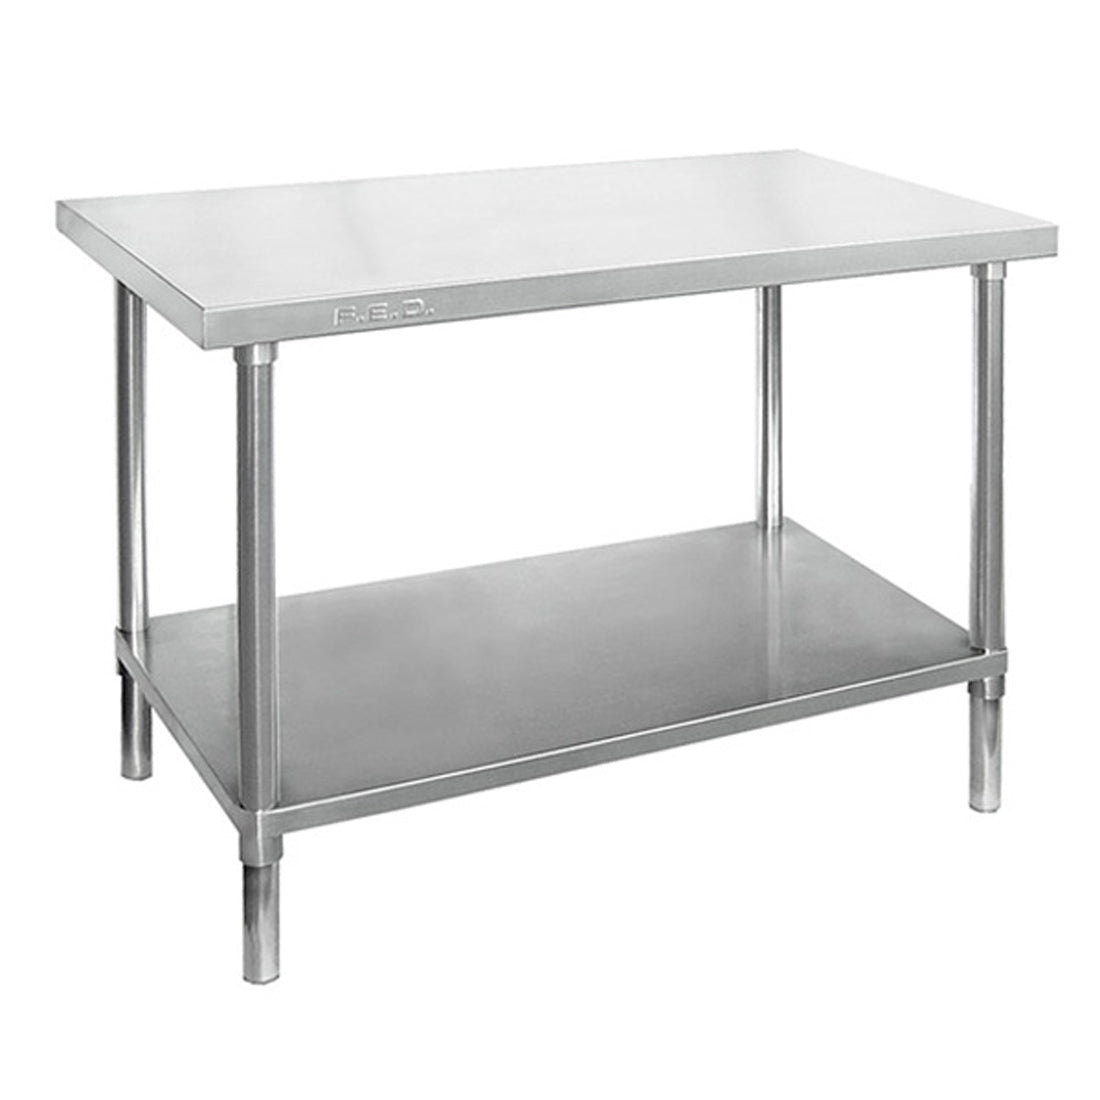 Modular Systems Stainless Steel Workbench 600x700x900 WB7-0600/A